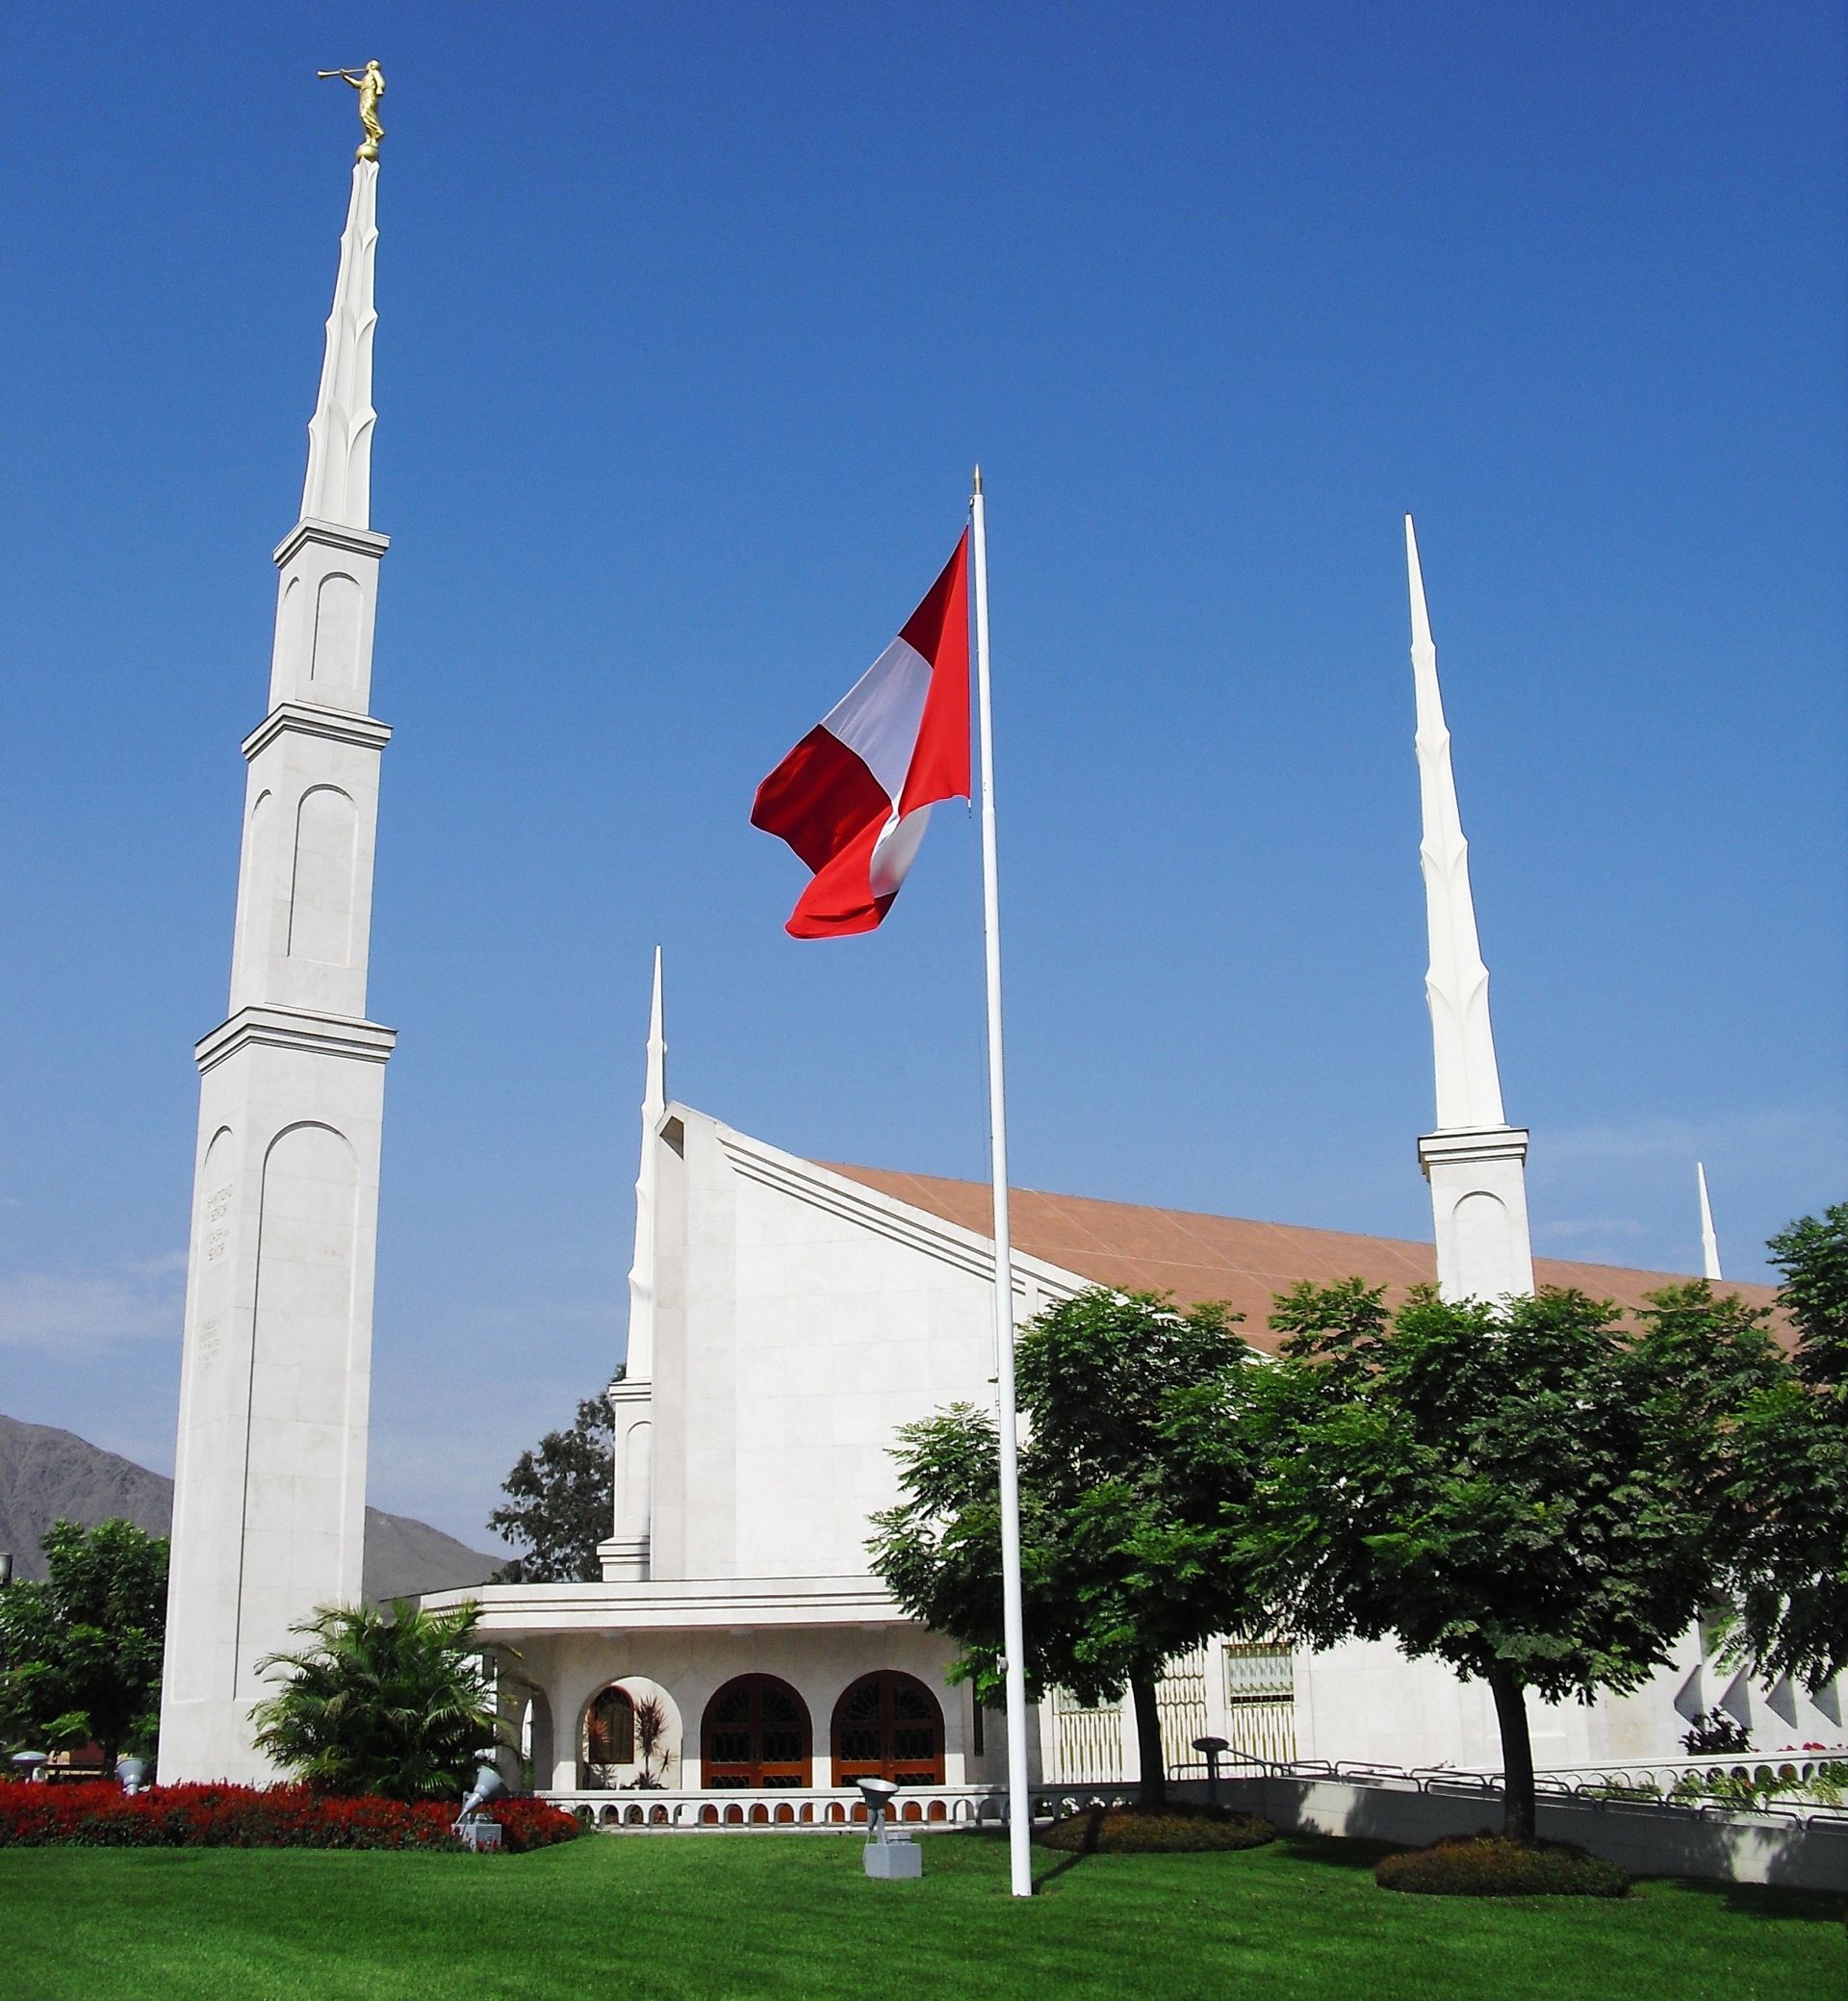 The Lima Peru Temple spires, including the entrance, scenery, and flag.